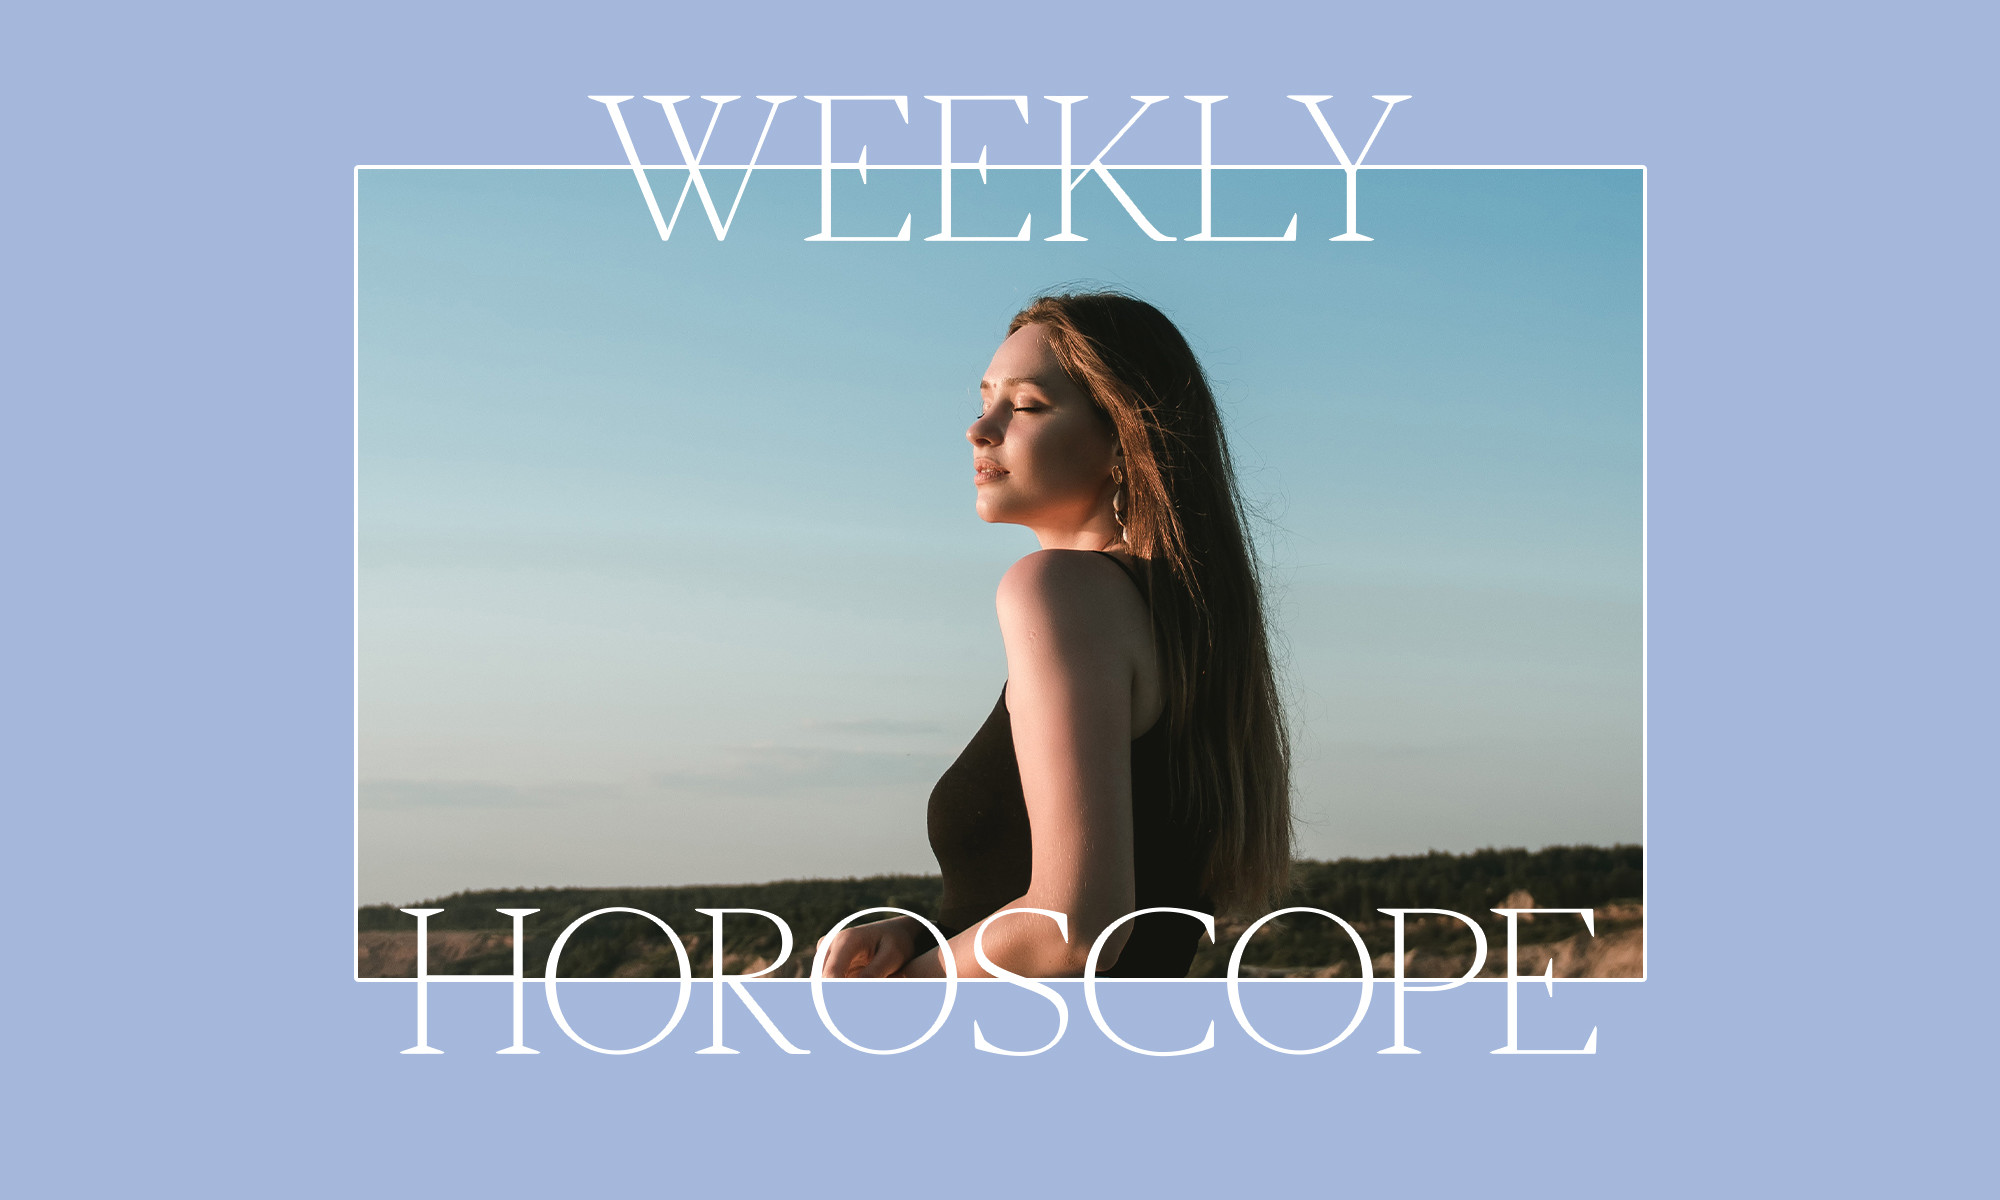 Weekly Horoscope For March 20-26, 2023 From The AstroTwins